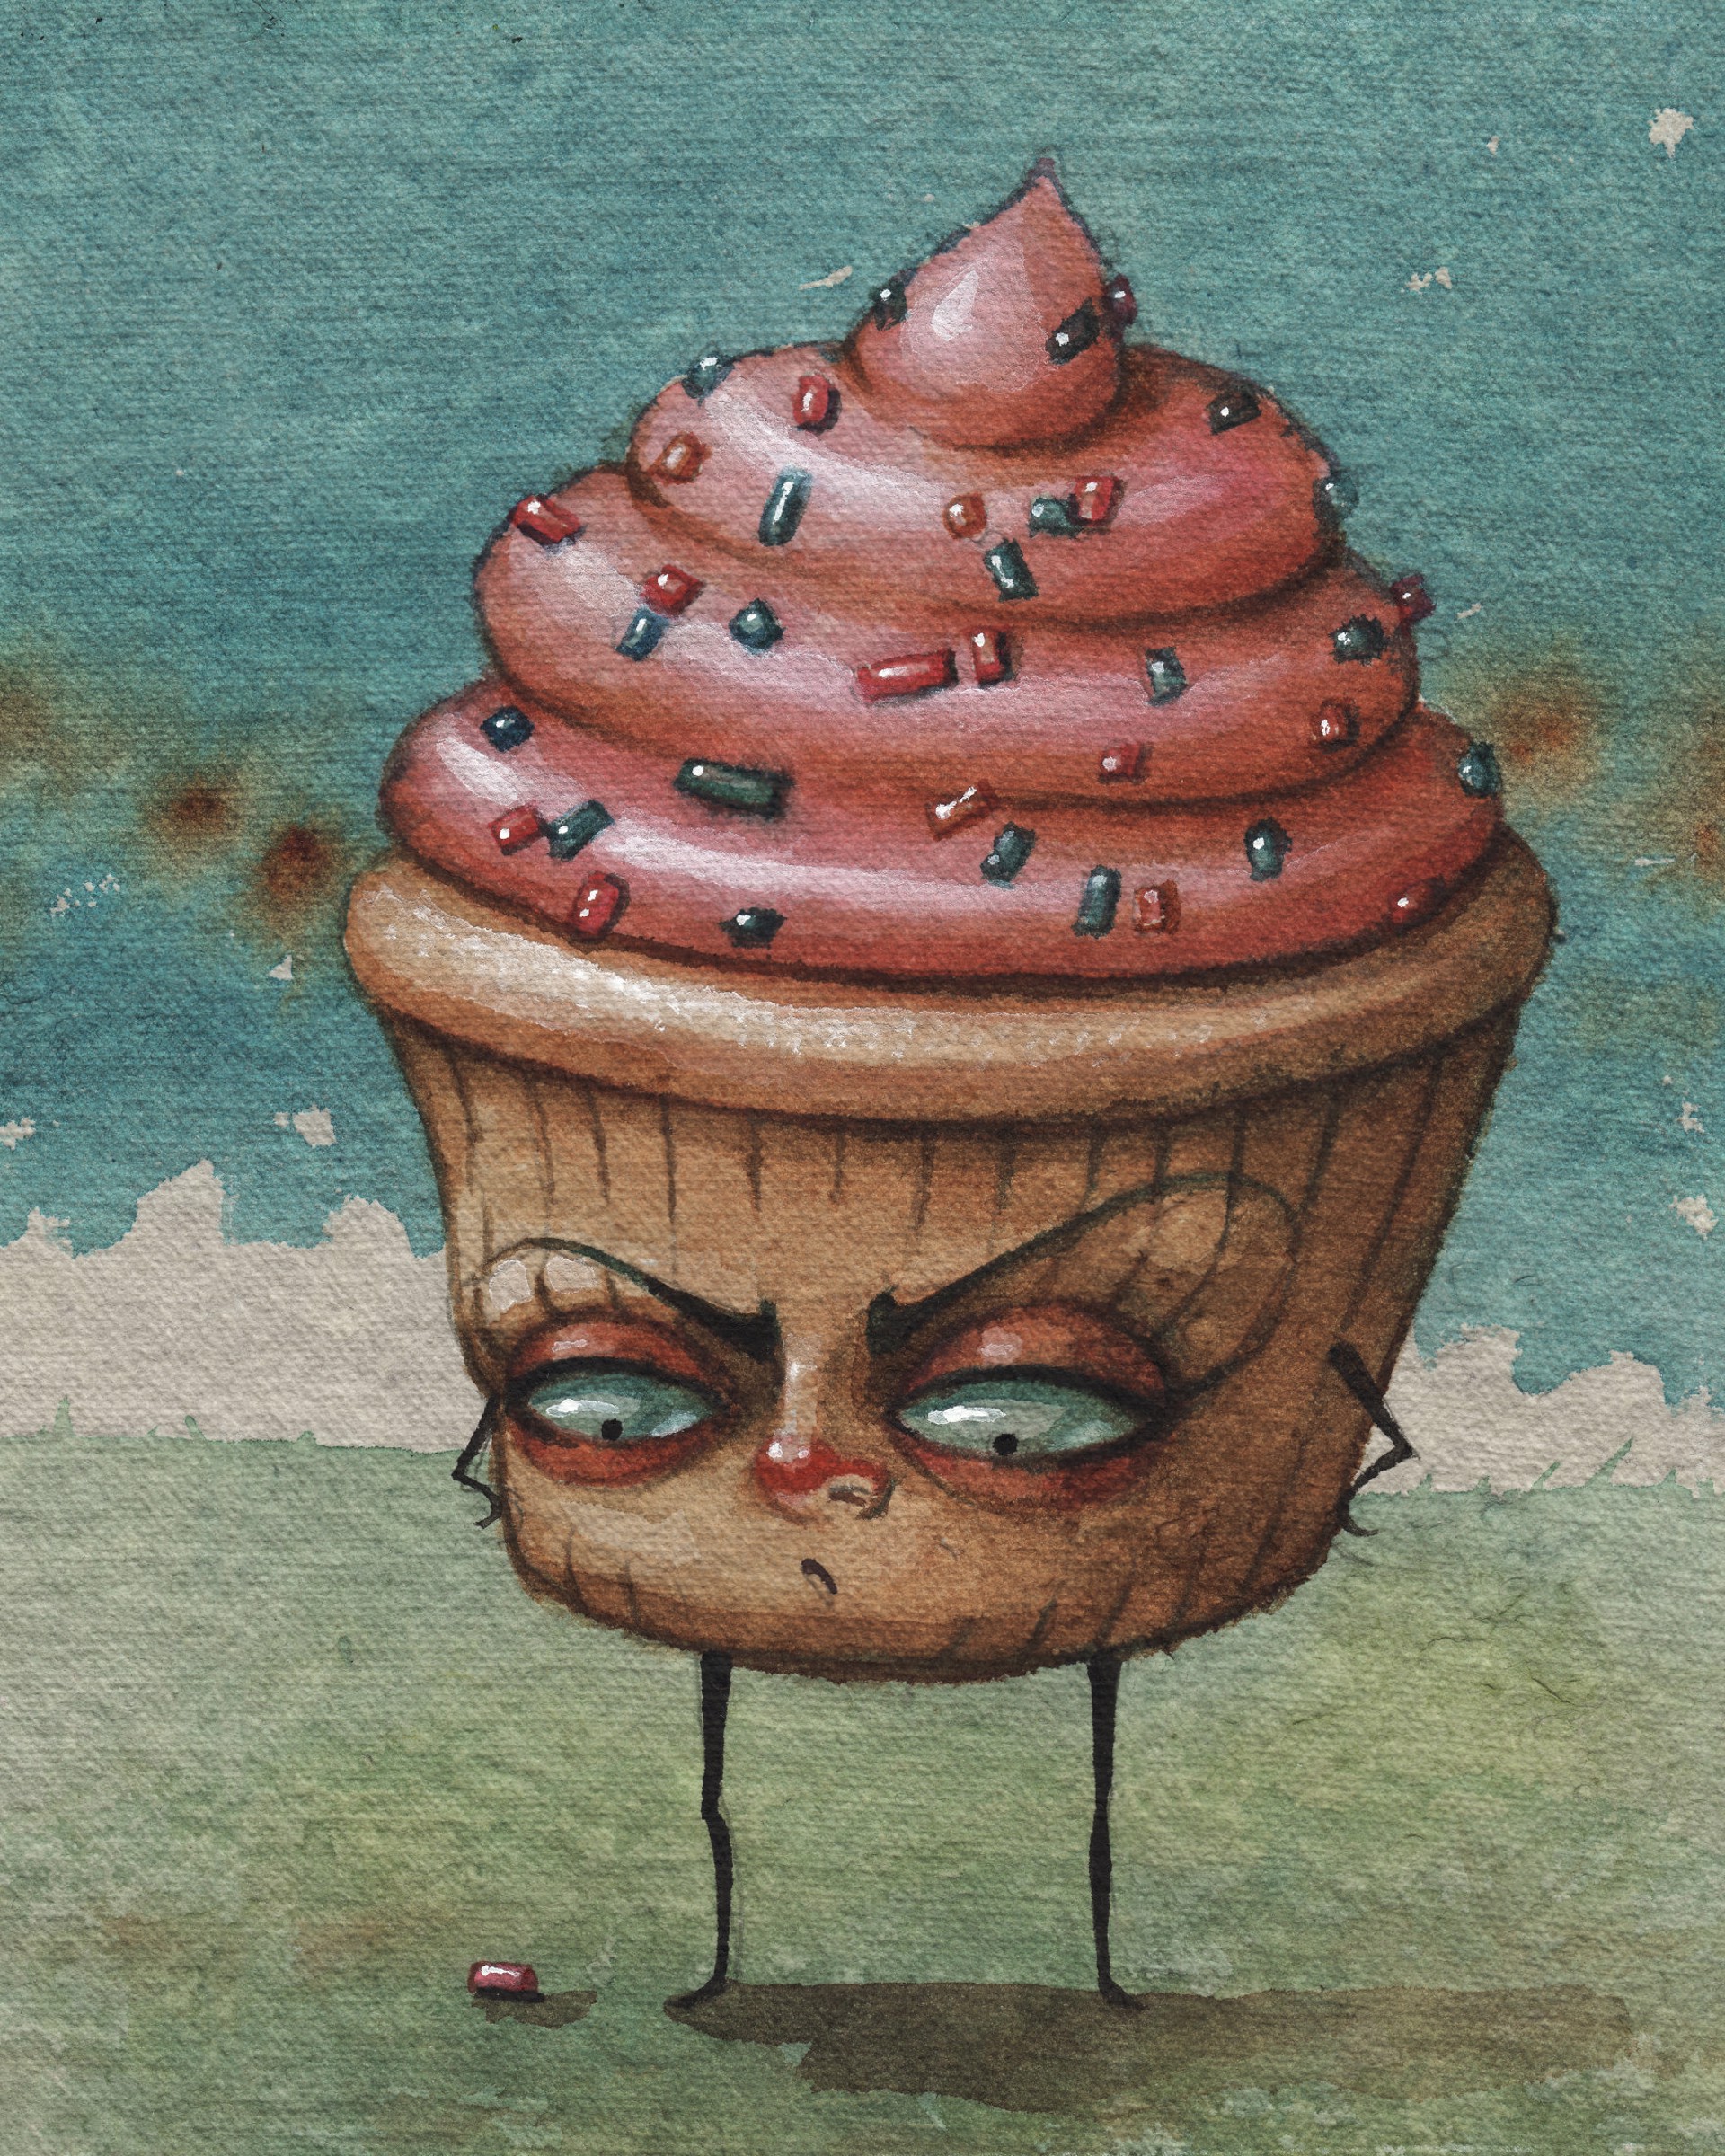 Cupcake of Fury by Liese Chavez